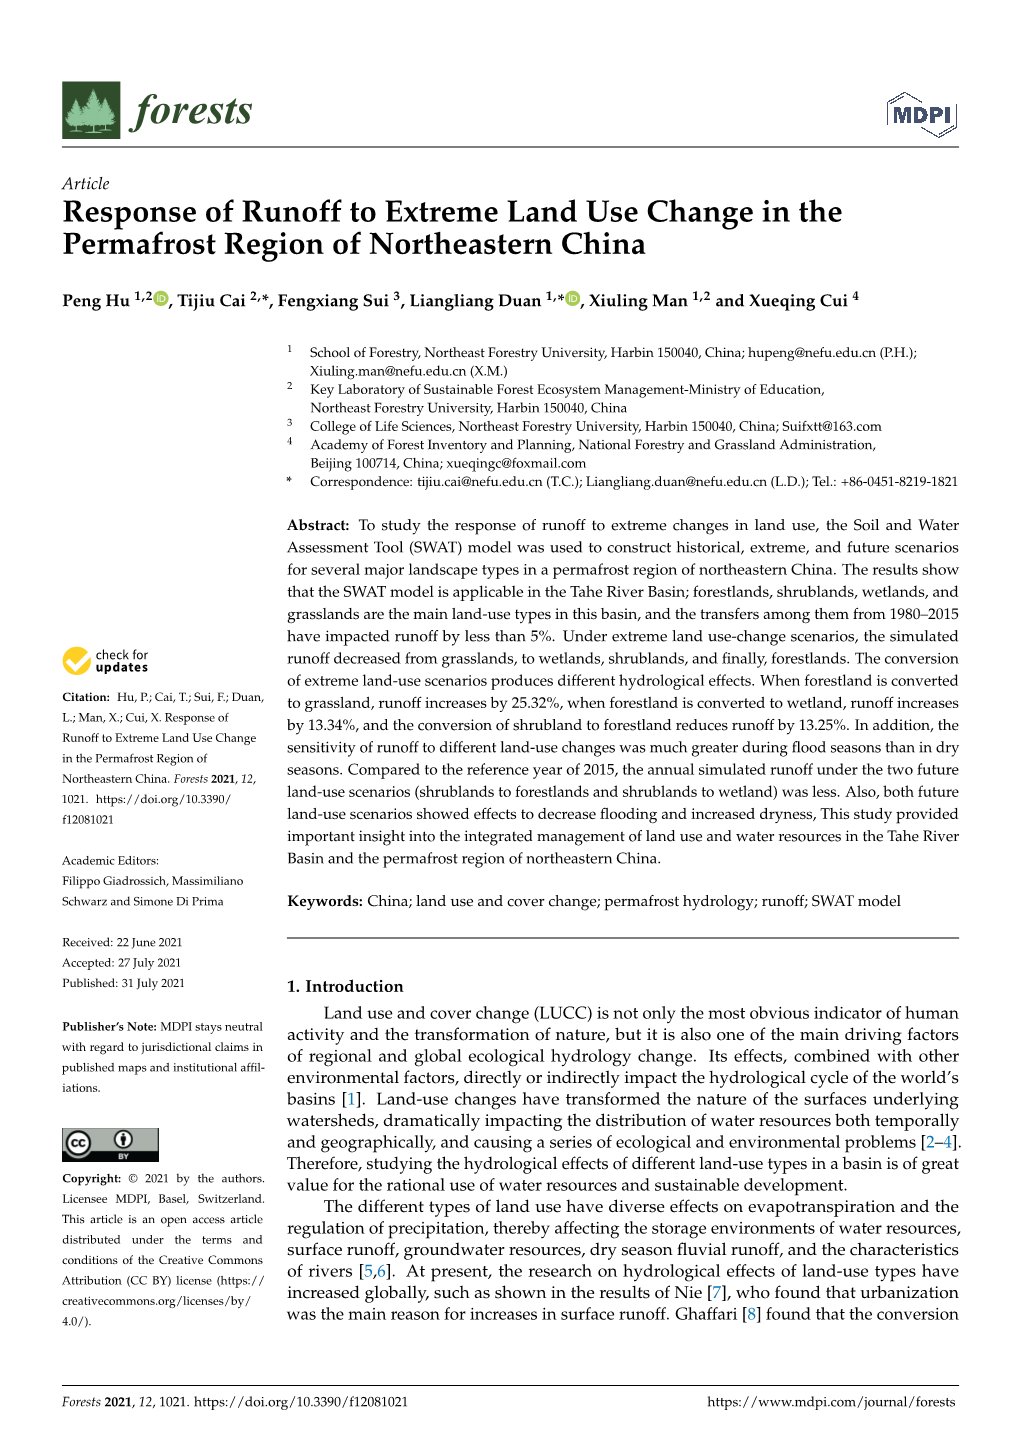 Response of Runoff to Extreme Land Use Change in the Permafrost Region of Northeastern China